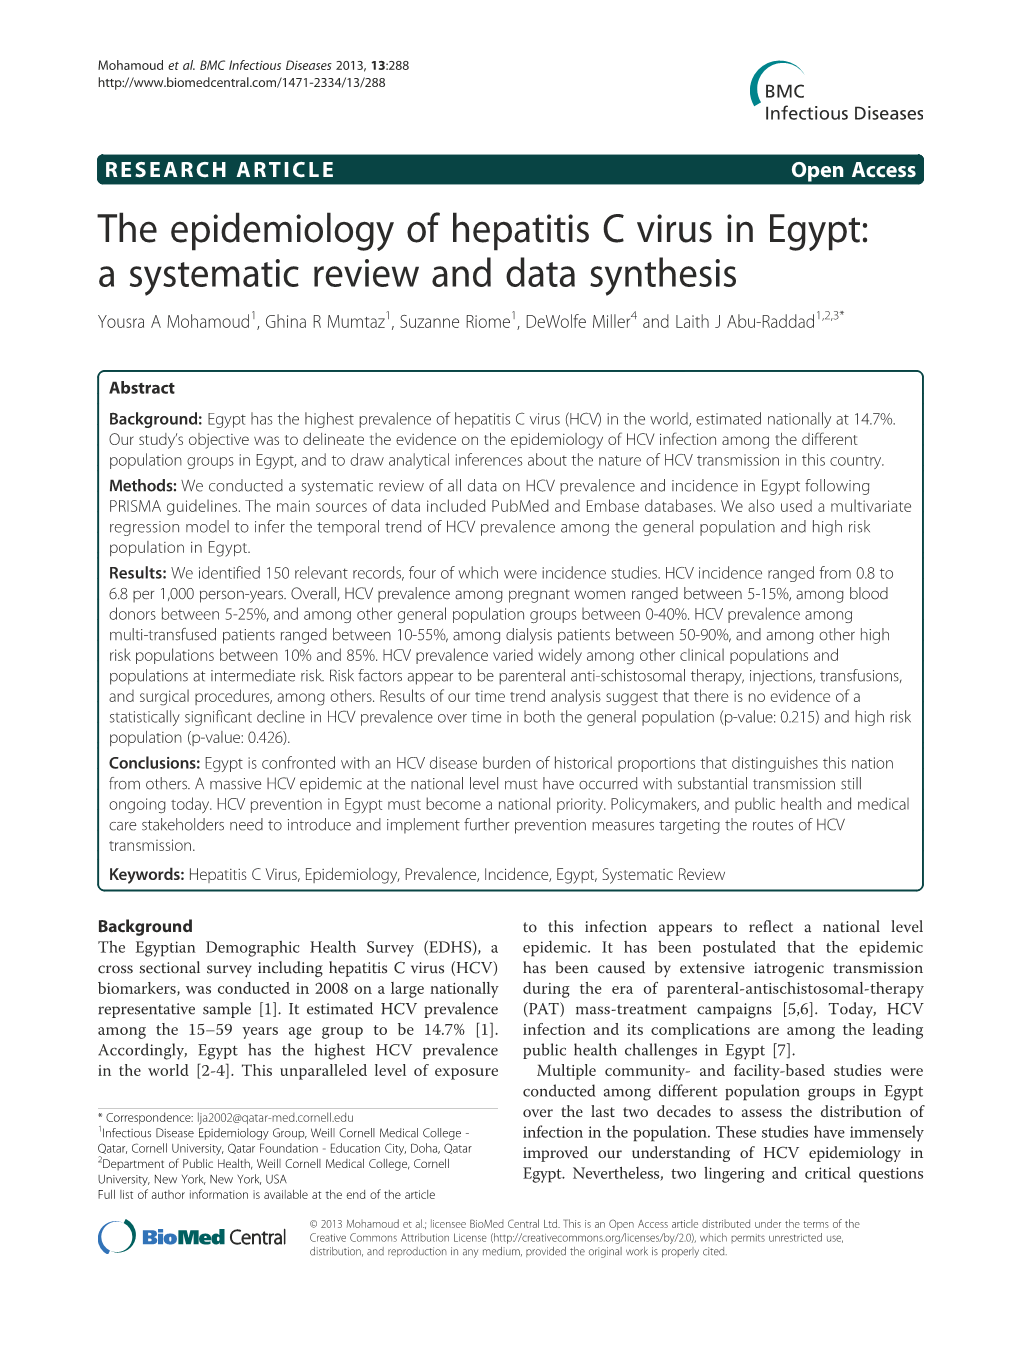 The Epidemiology of Hepatitis C Virus in Egypt: a Systematic Review And